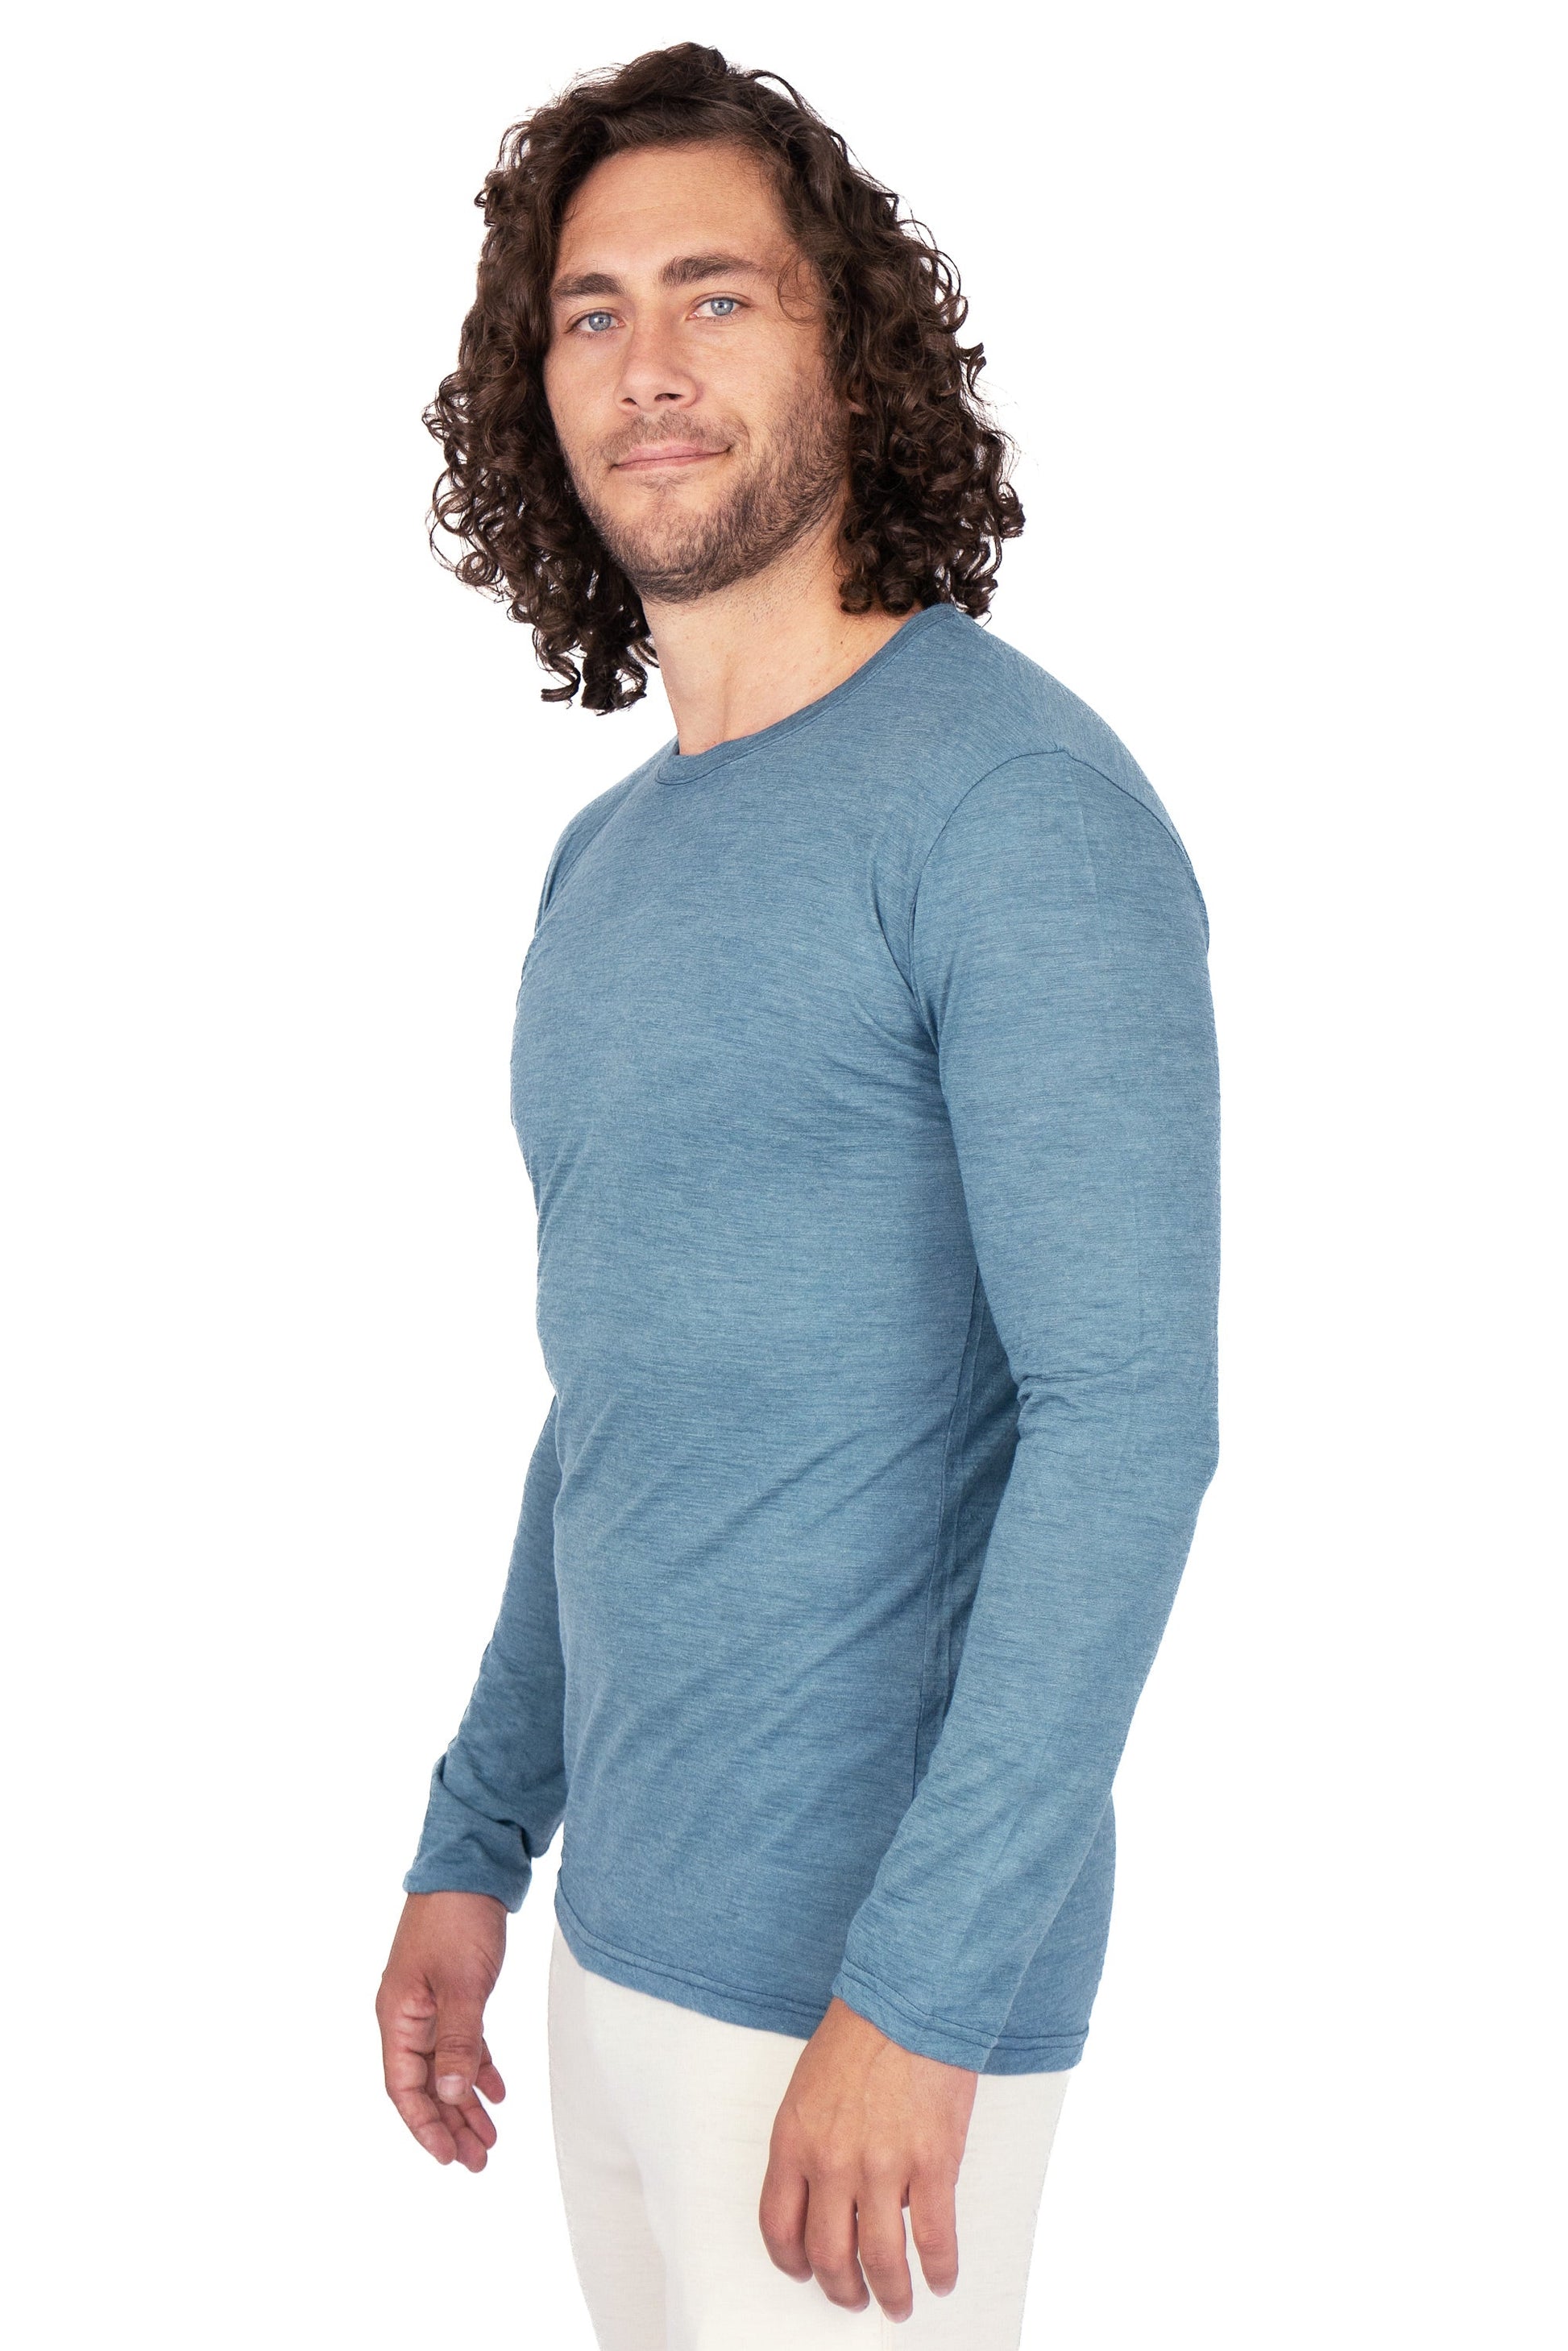 Men's Alpaca Wool Long Sleeve Base Layer: 110 Ultralight color Natural Turquoise